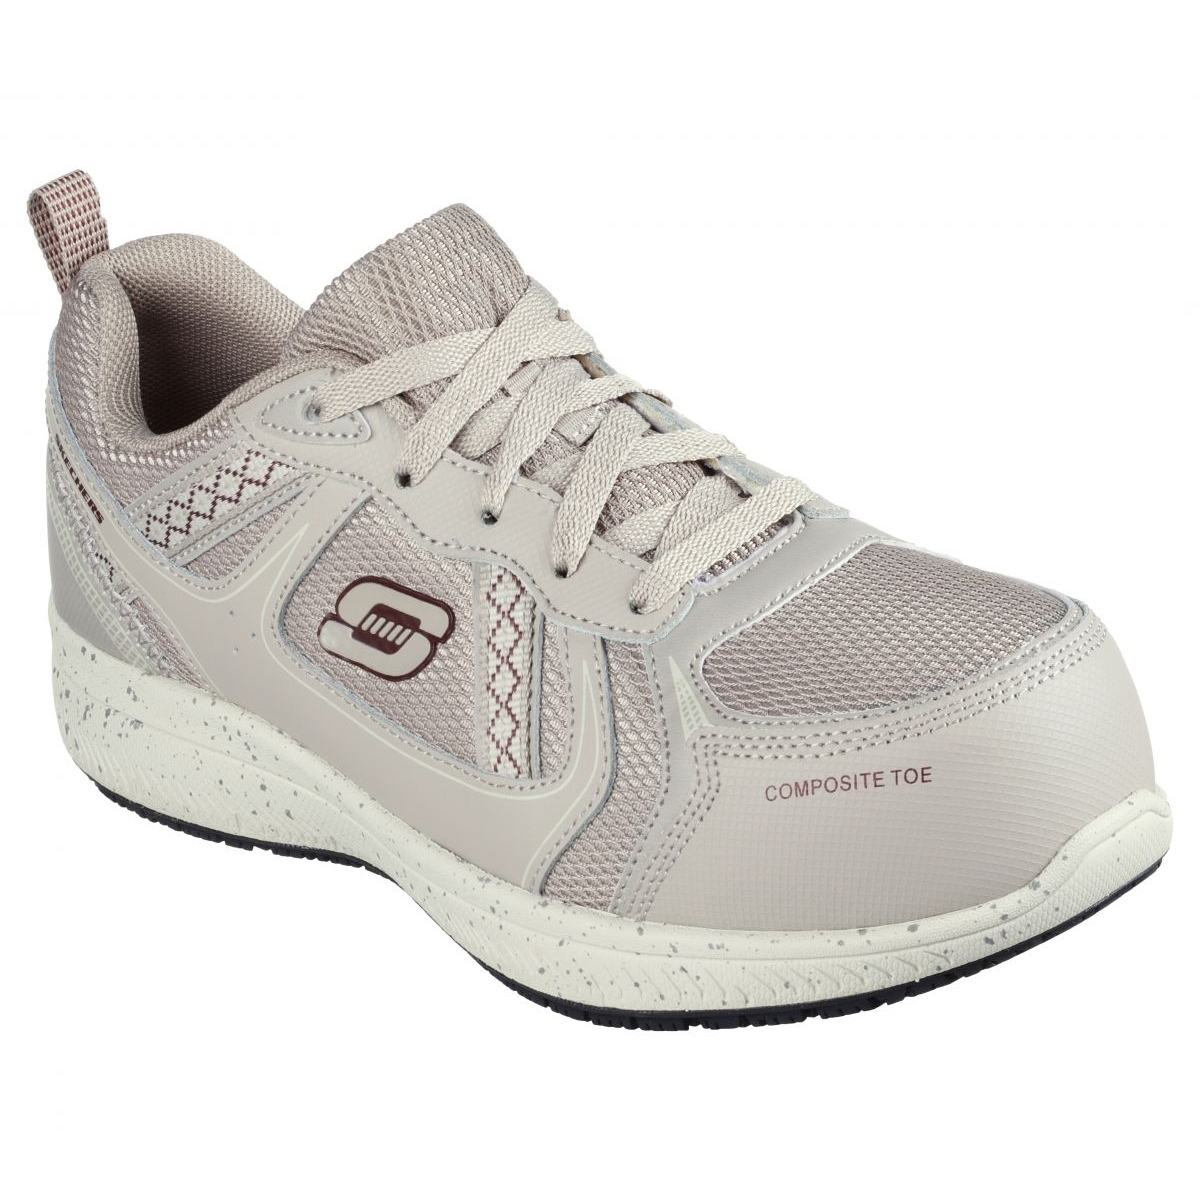 Skechers ELG-5 - Composite Toe TAUPE - TAUPE, 10